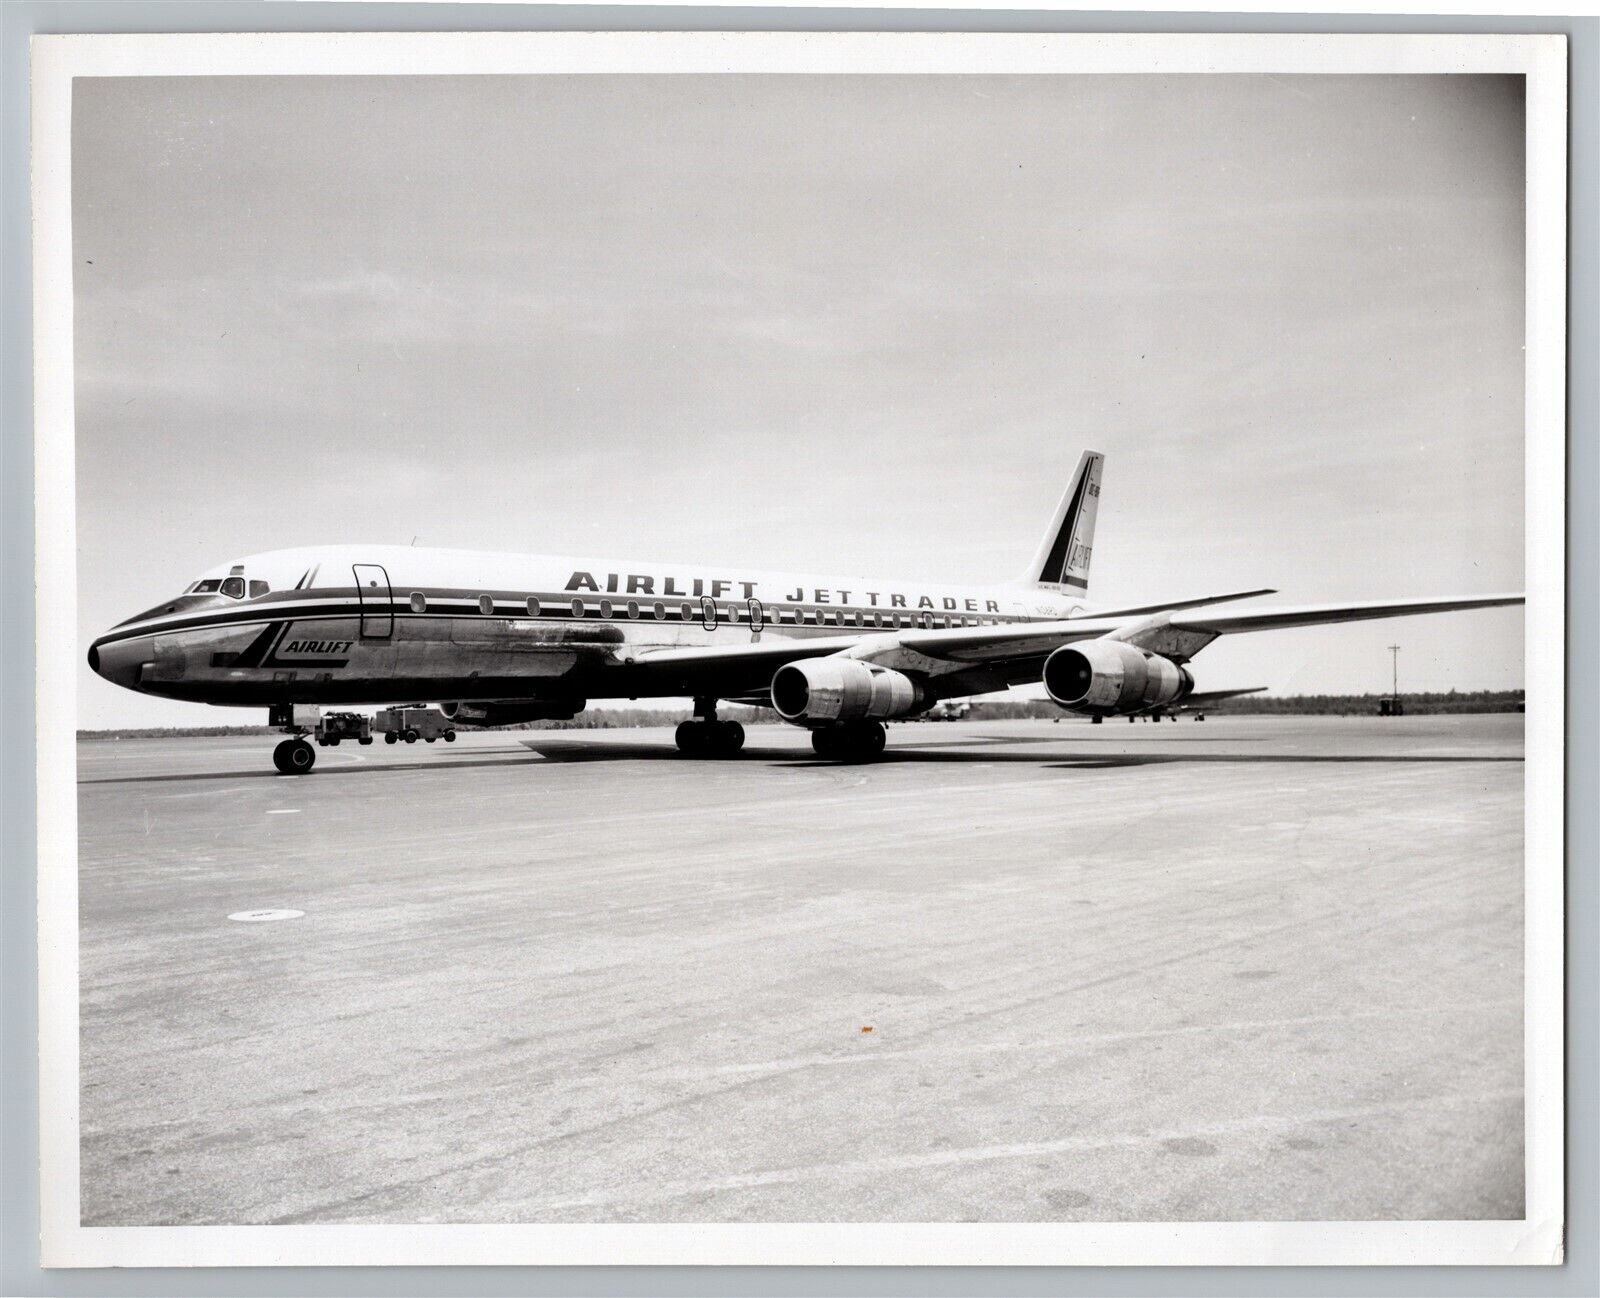 Airlift Jet Trader Airlines Douglas DC 8F Aviation Airplane 1960s B&W Photo #3C2